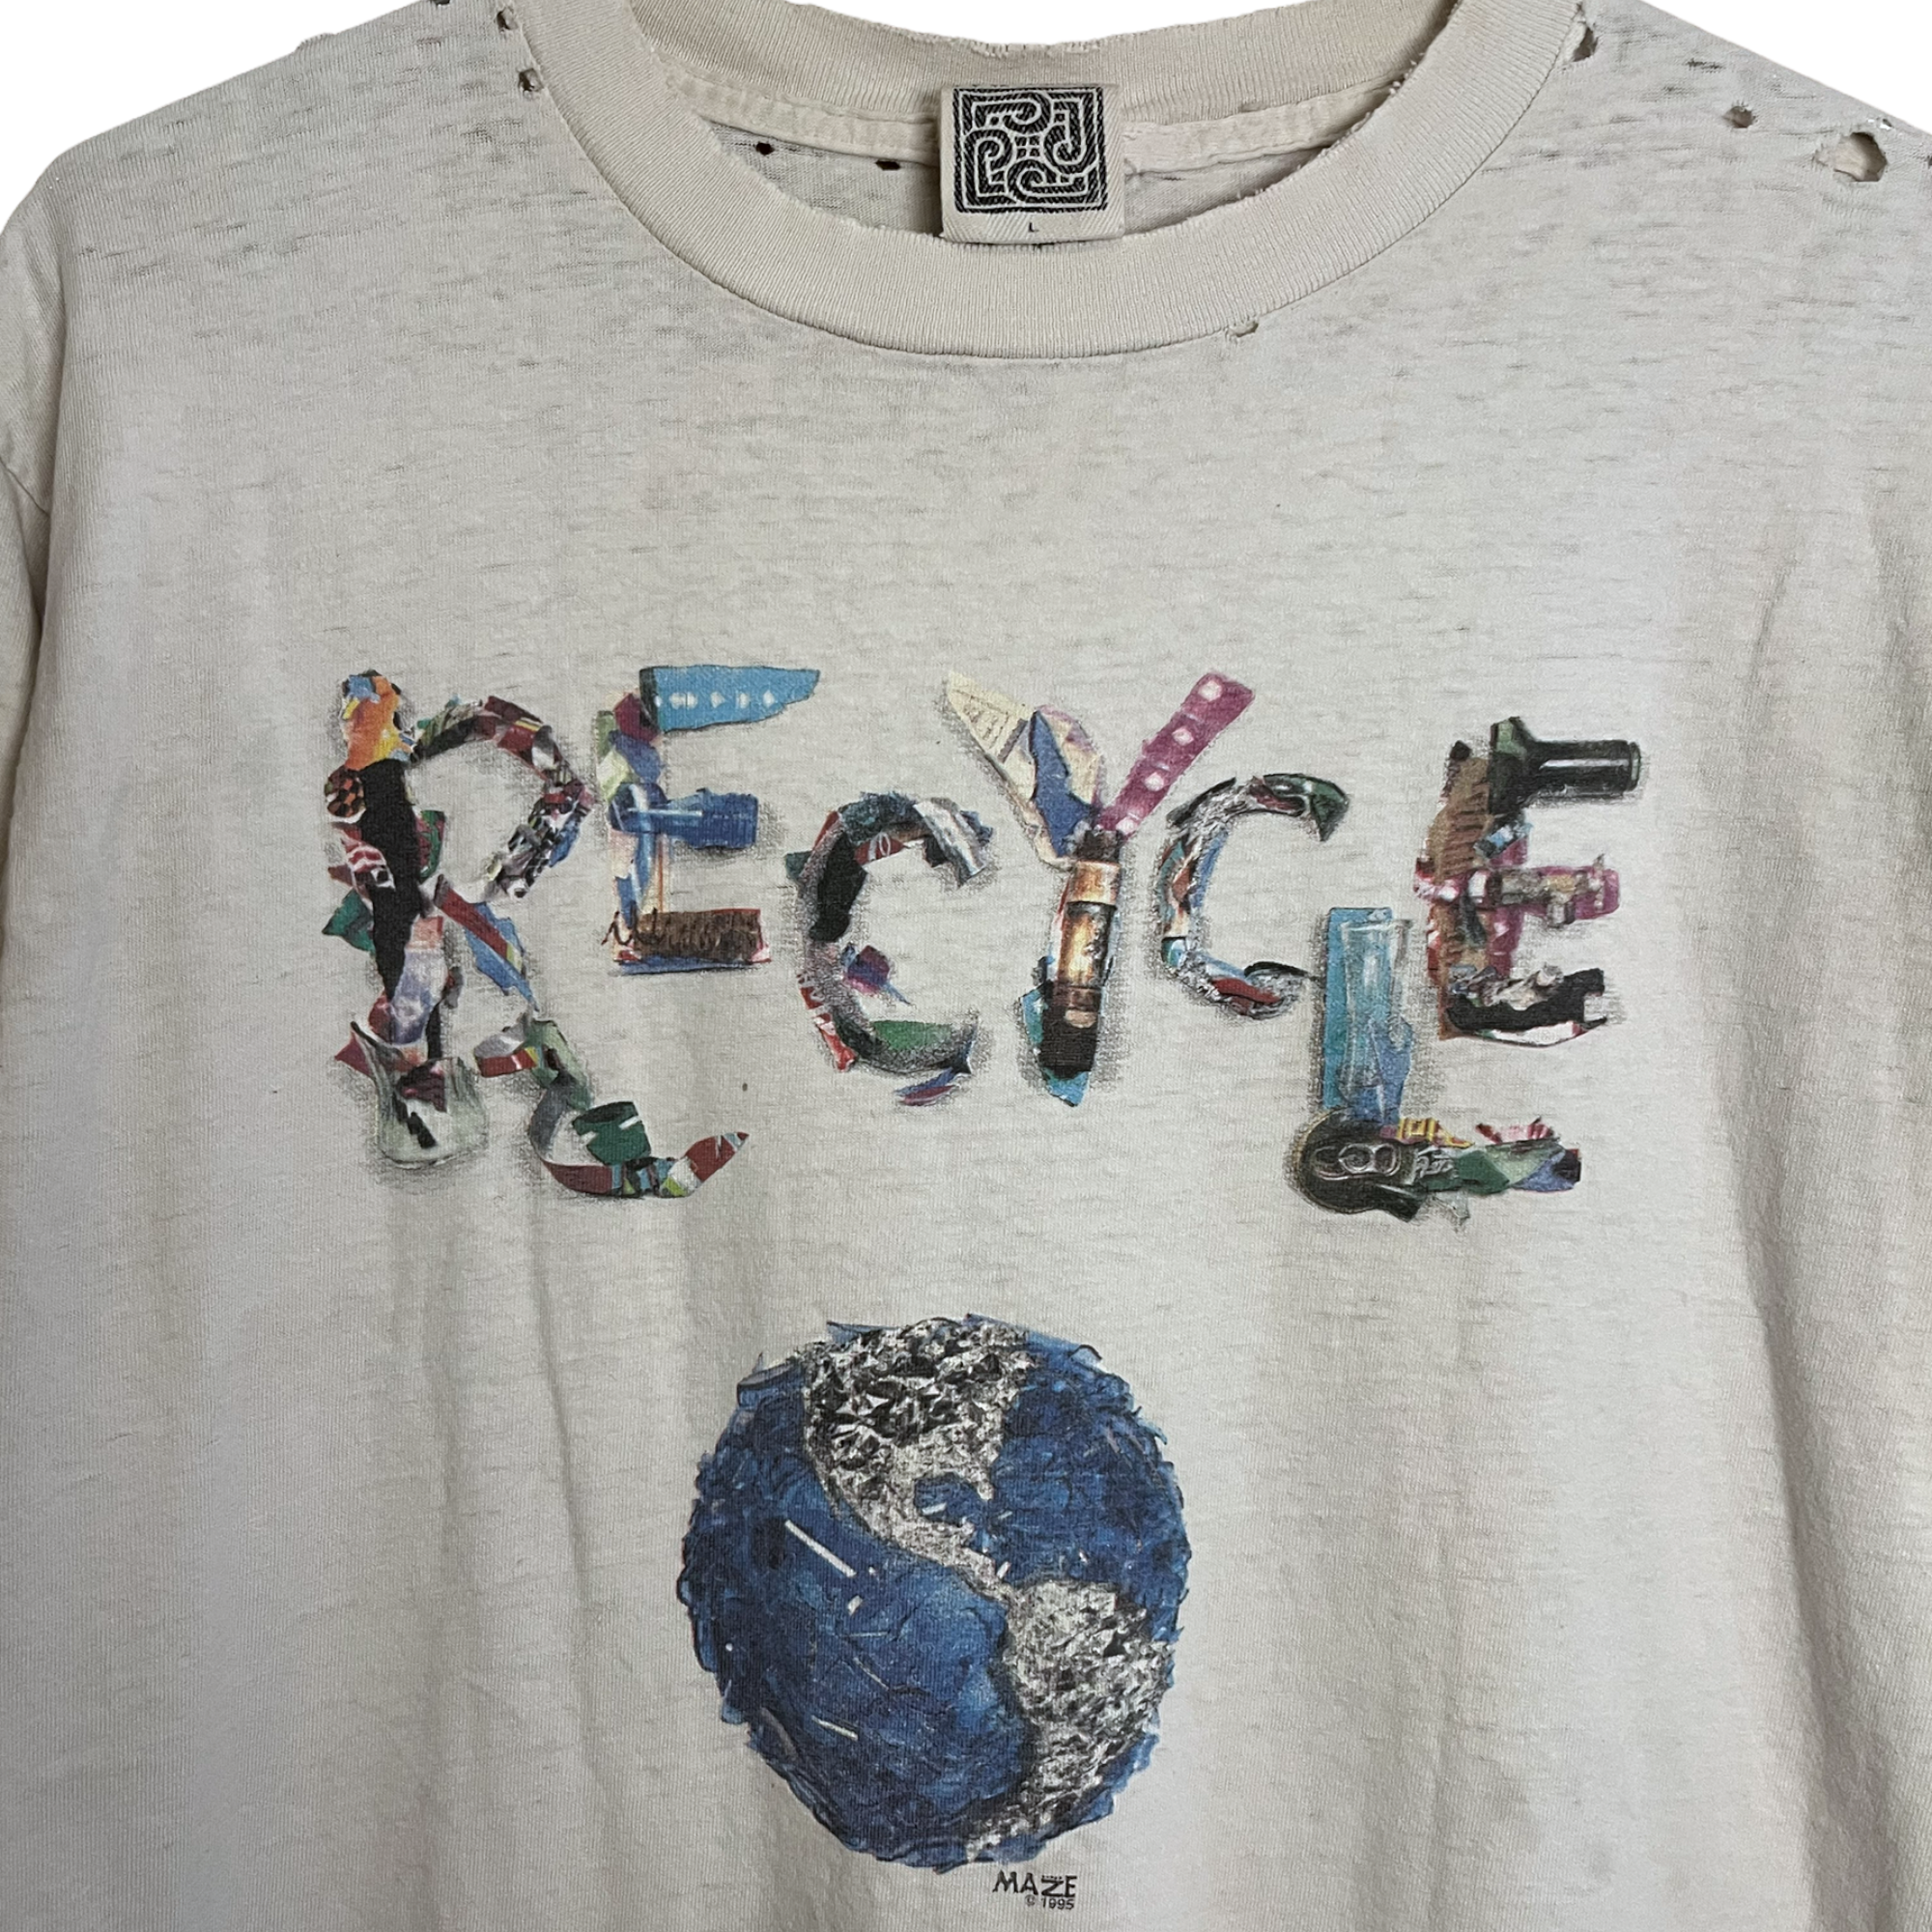 1995 Thrashed ‘Recycle’ Vintage T-Shirt - Aged White - L